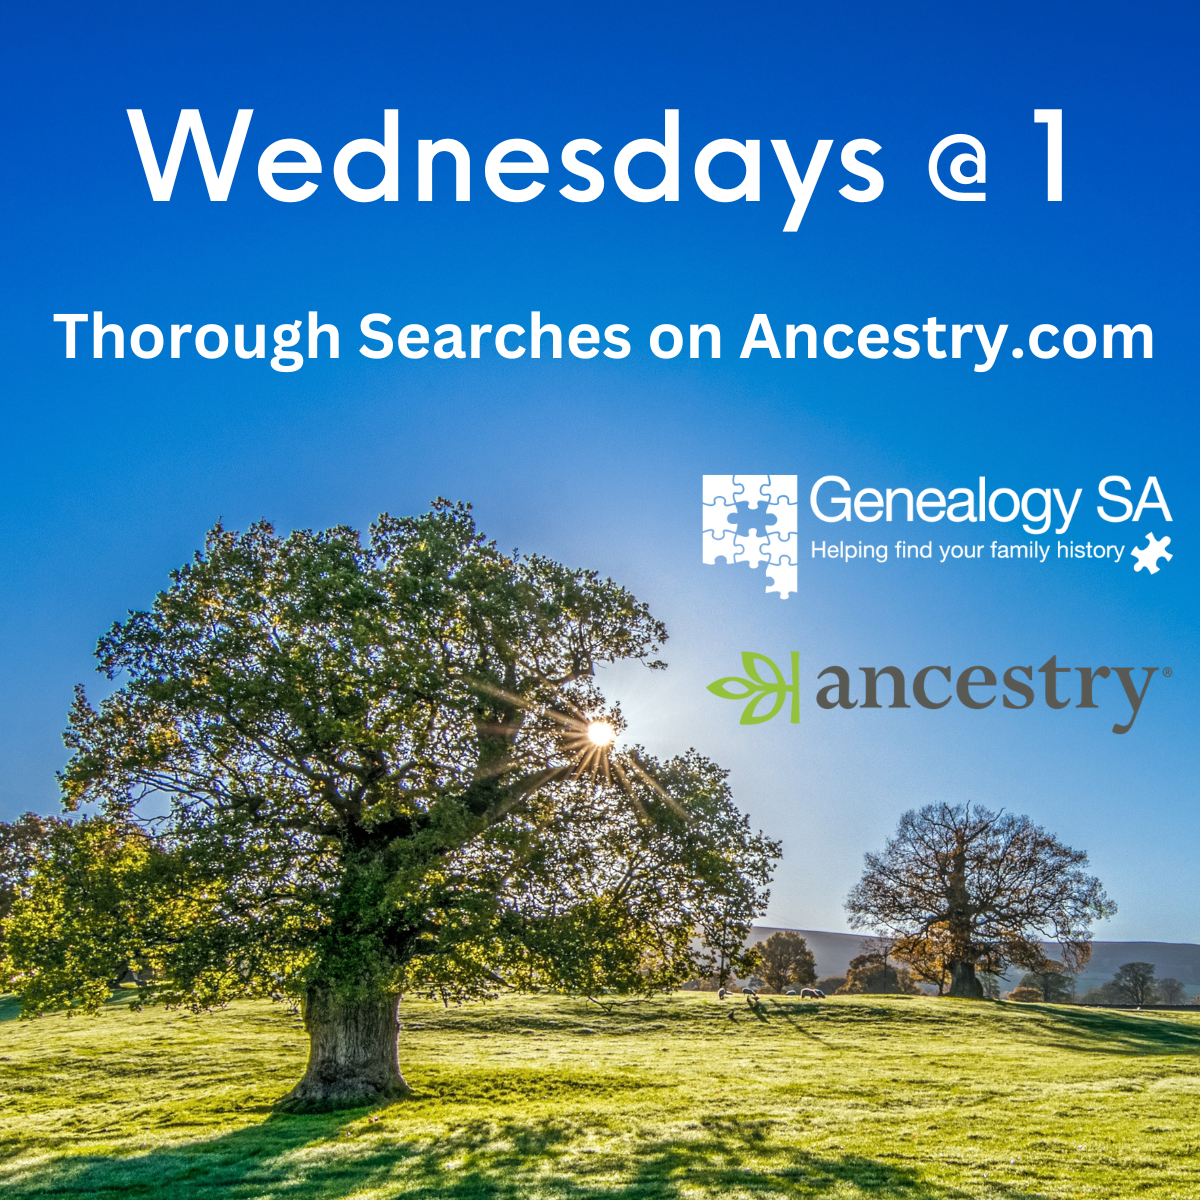 A tree in a green field. Text: Wednesdays @ 1, Thorough searches on ancestry.com